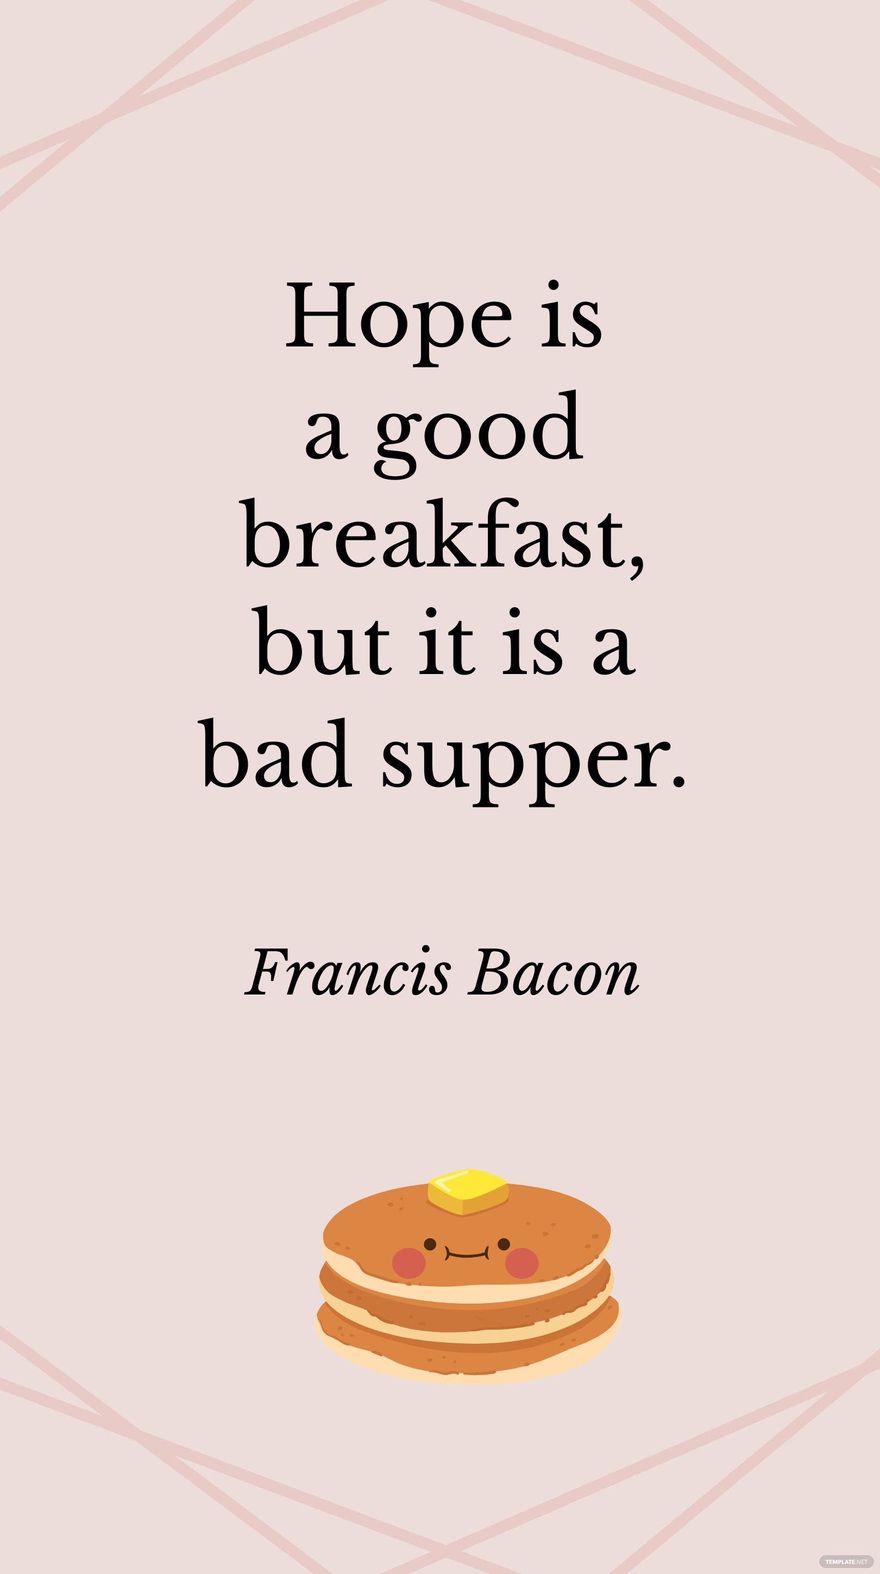 Francis Bacon - Hope is a good breakfast, but it is a bad supper.